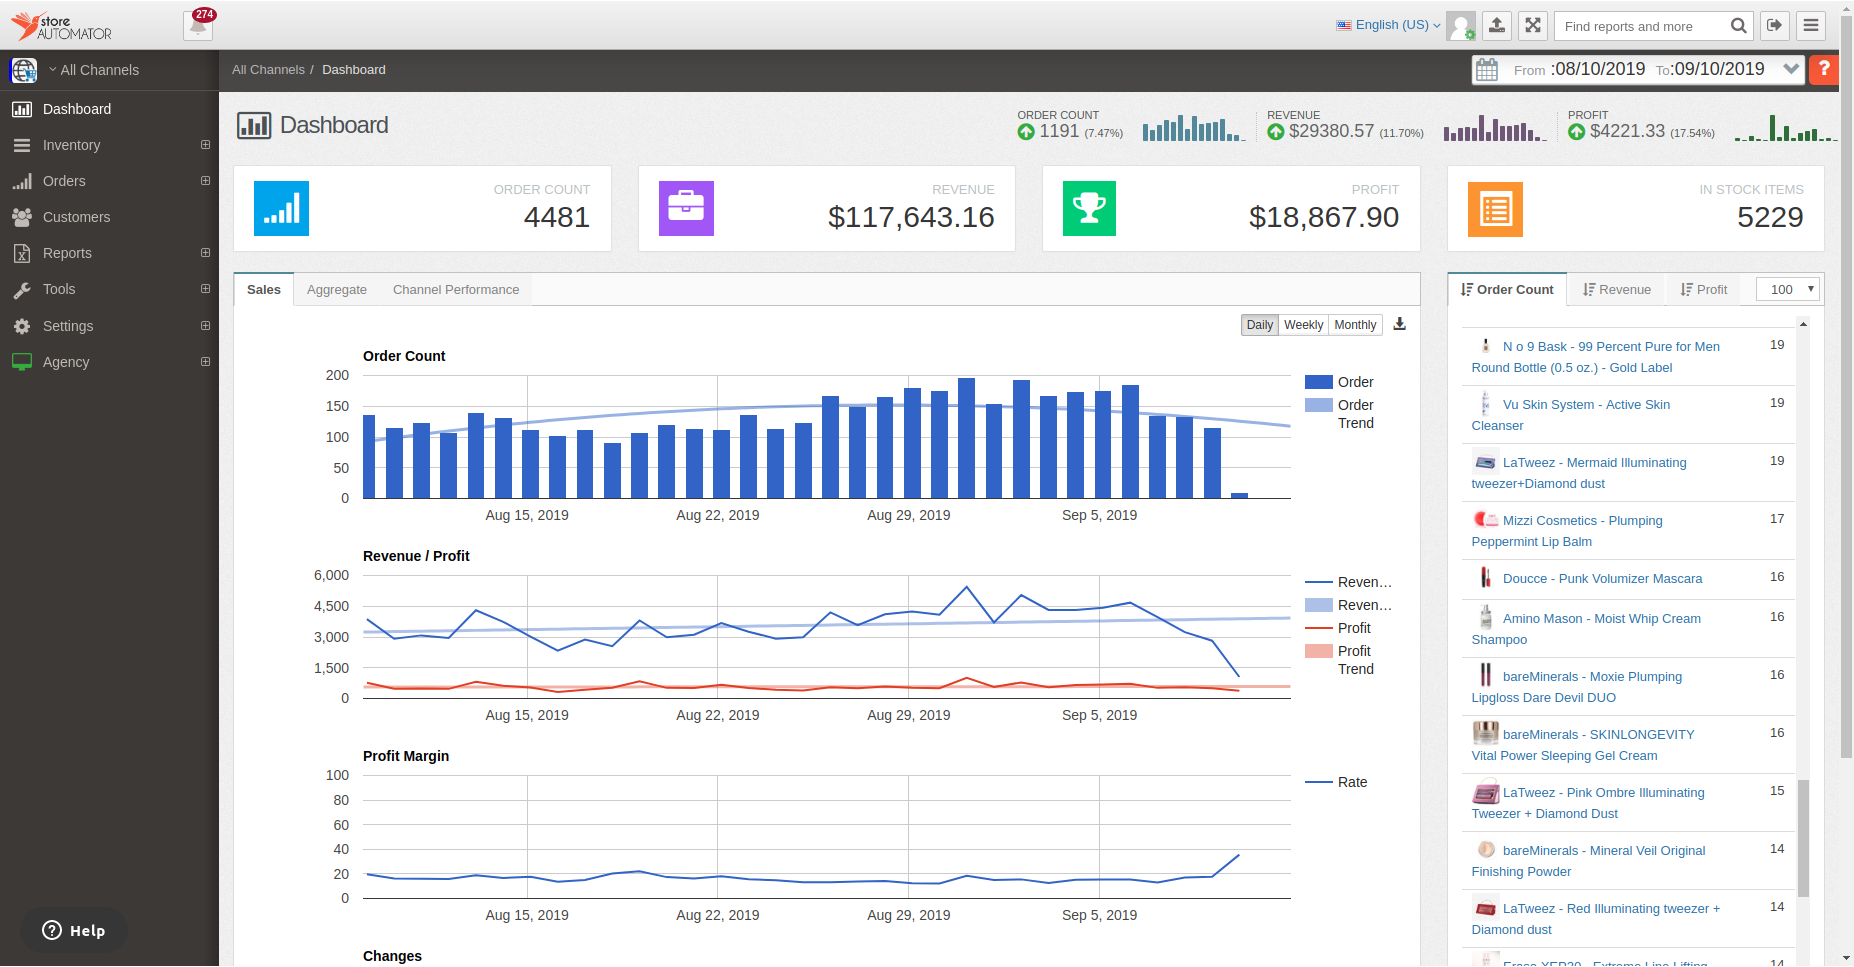 Monitor performance and sales across channels from one dashboard.